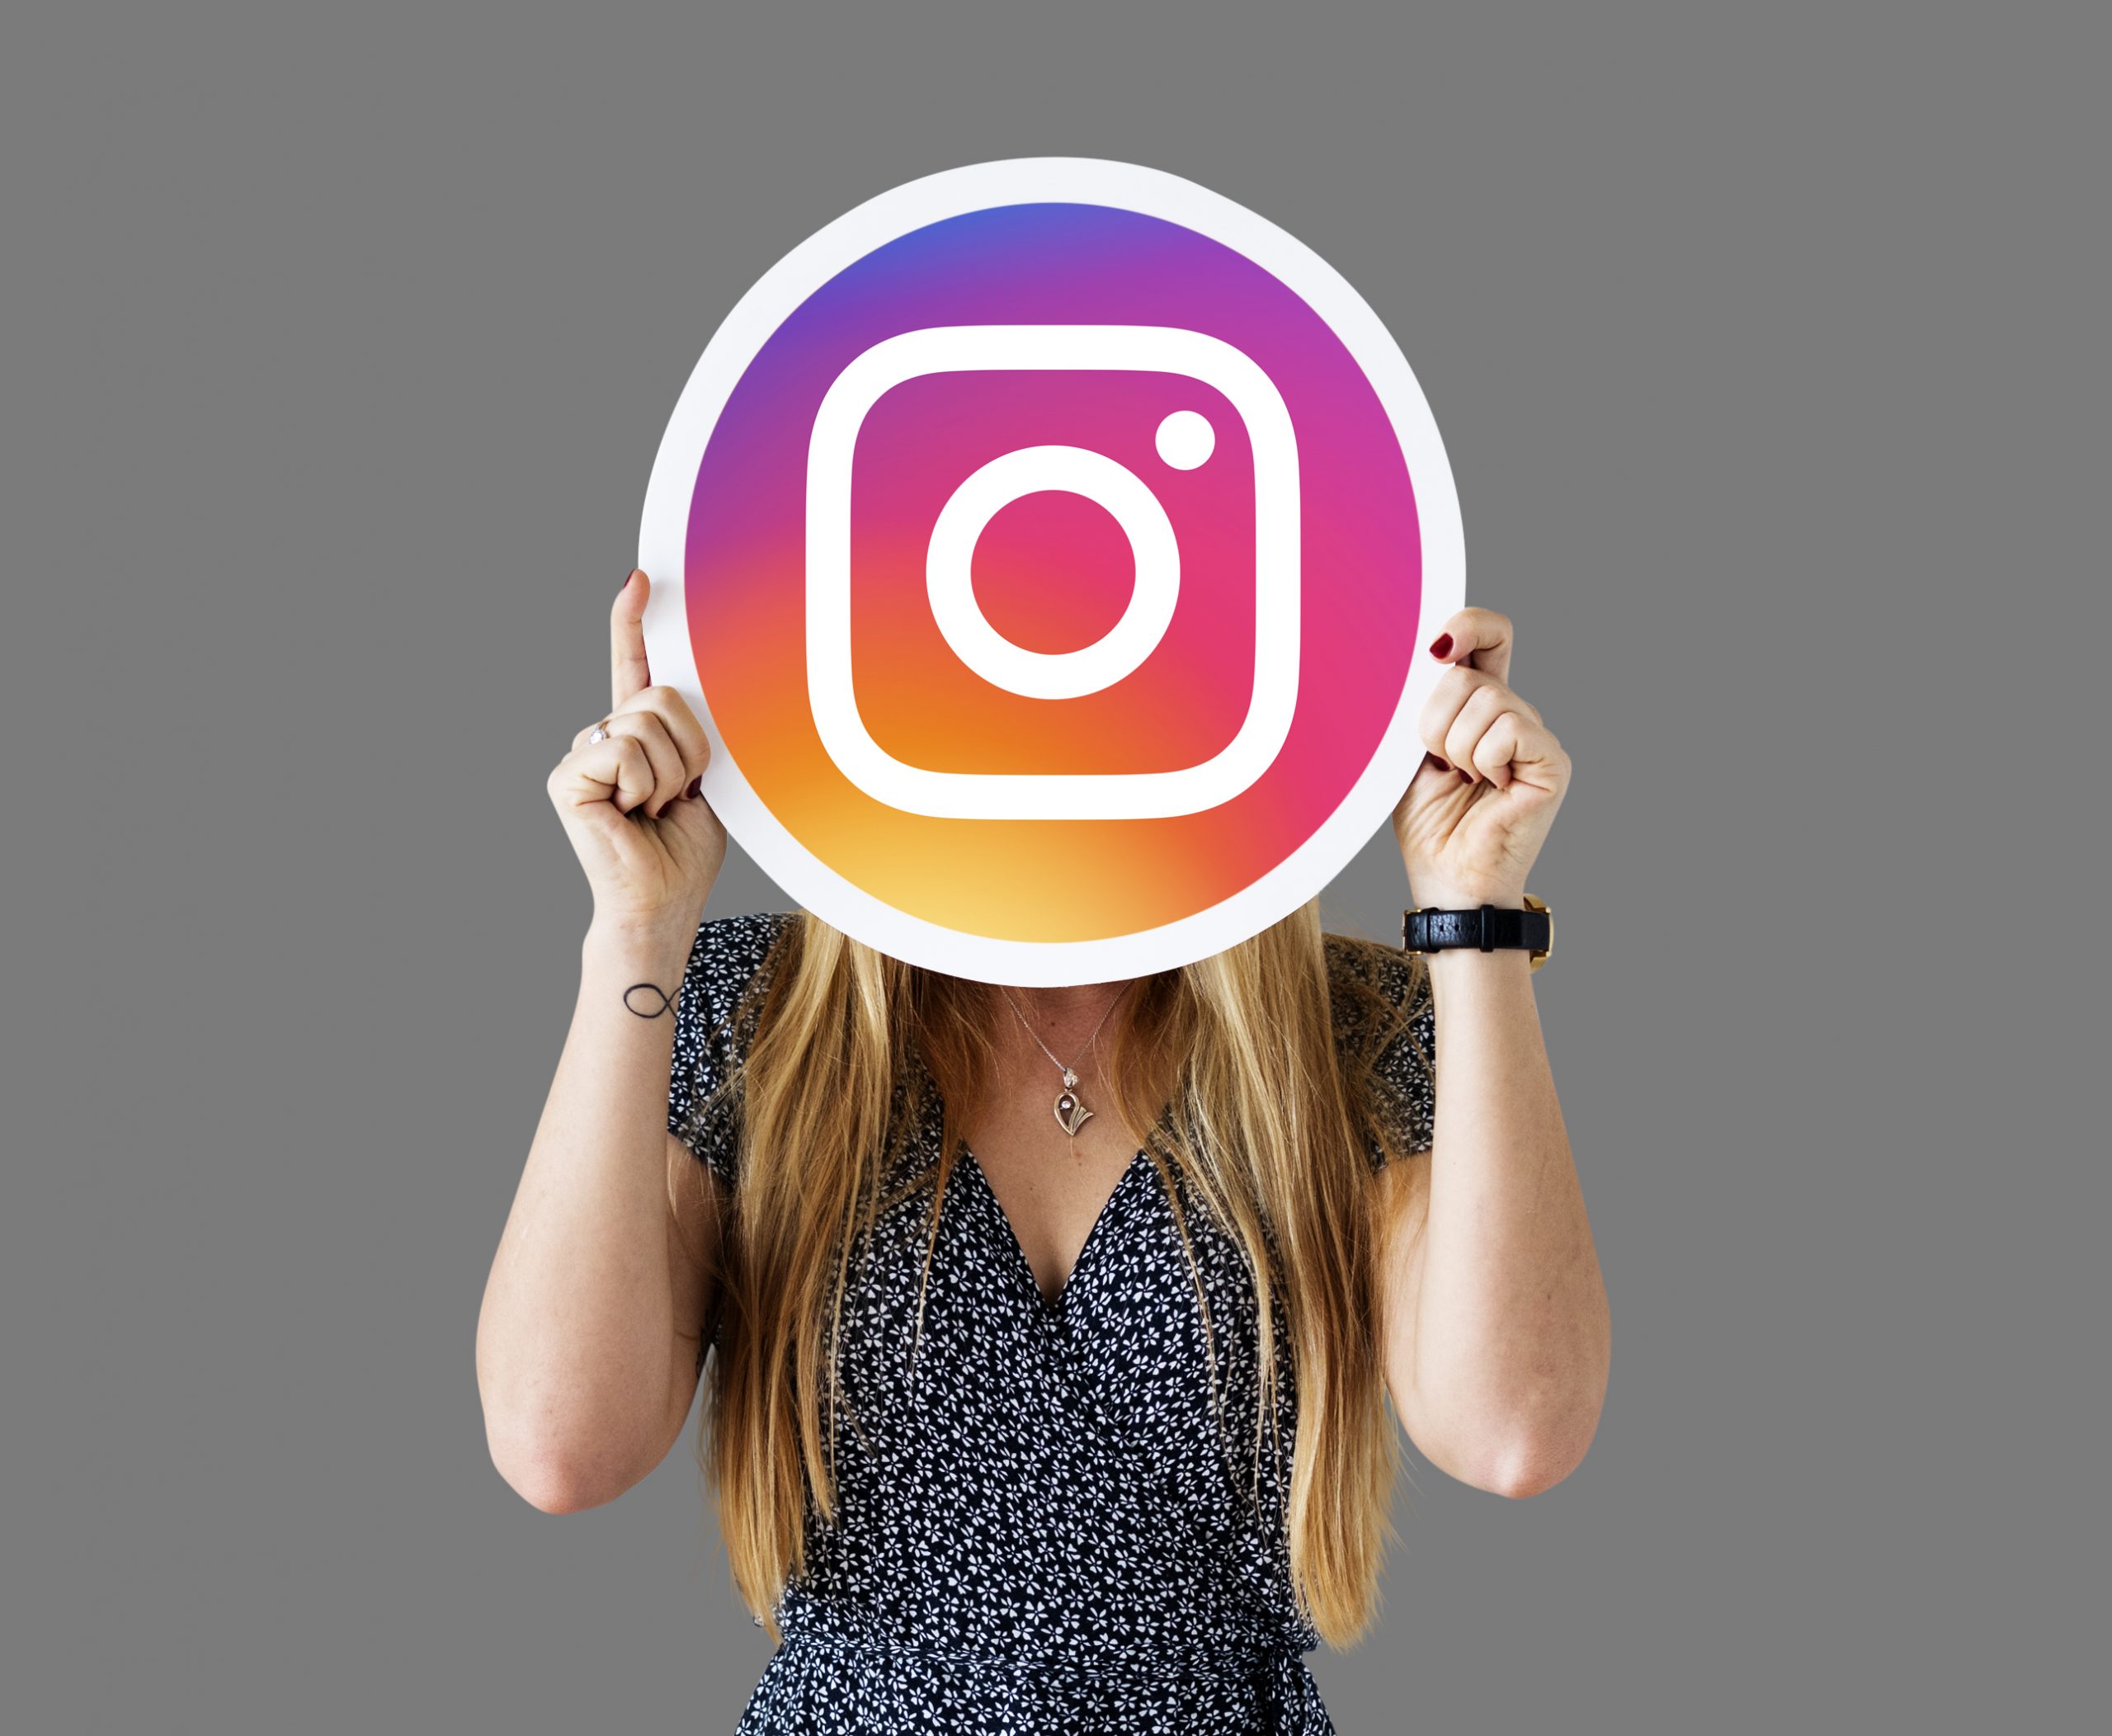 No more annoying ads in your Instagram feed!